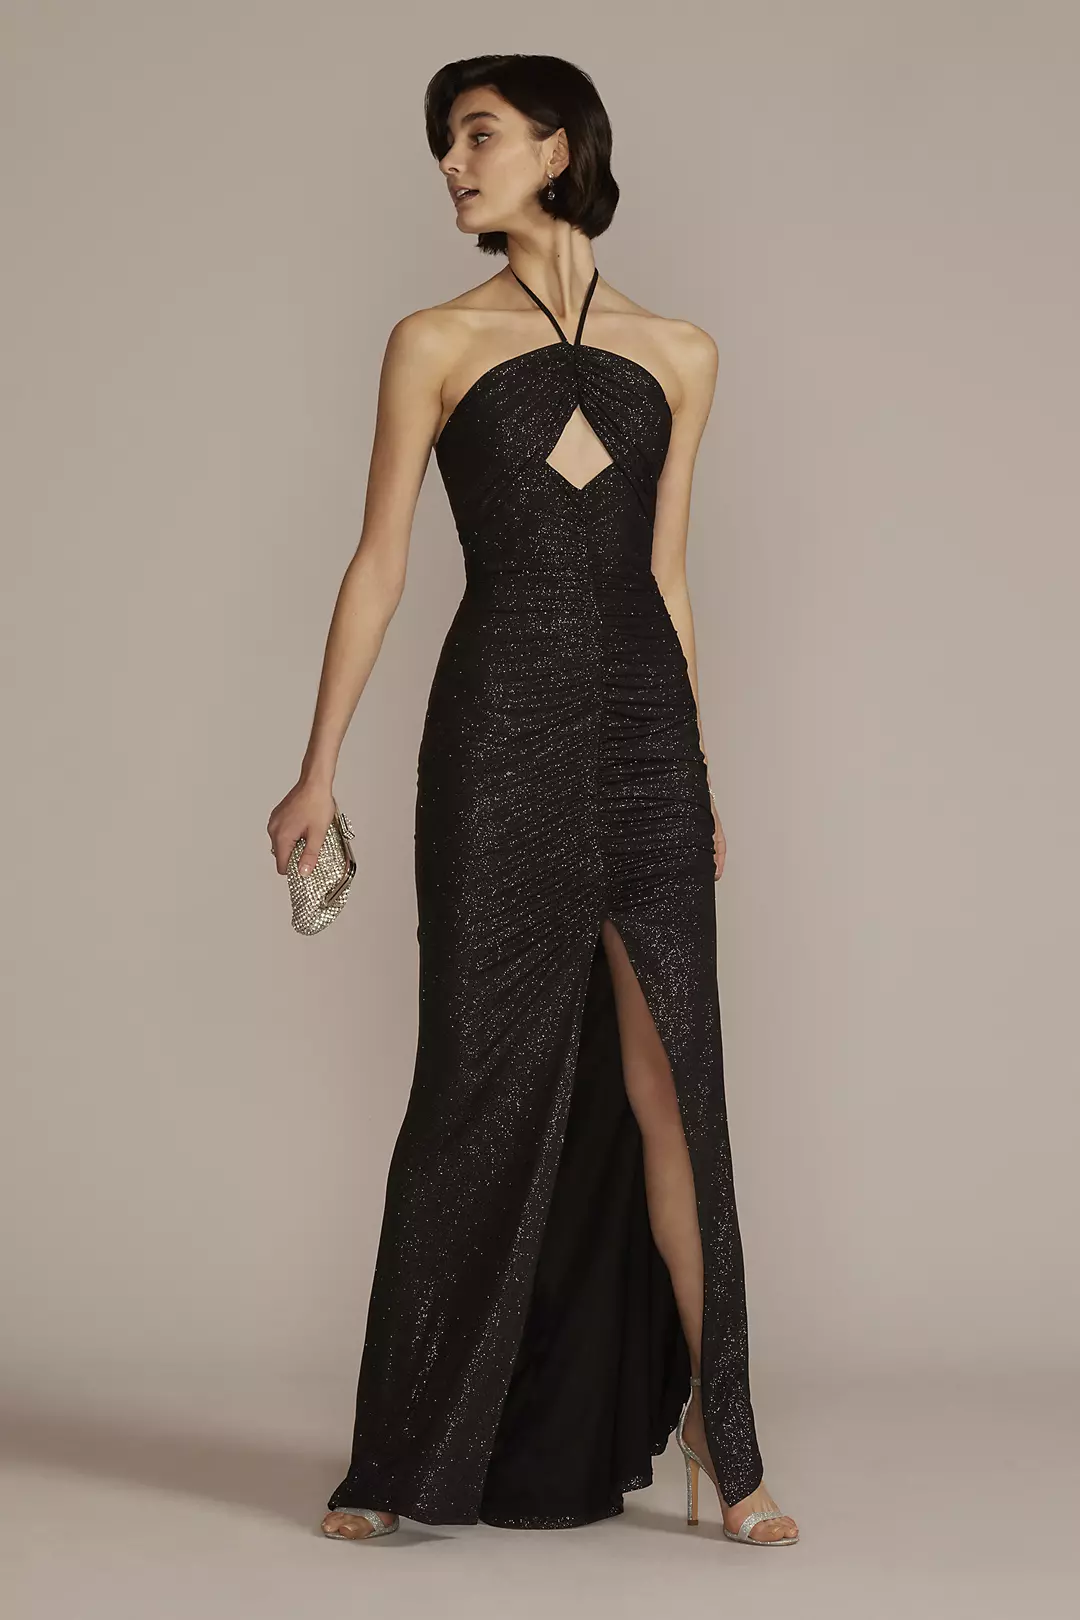 Cutout Glitter Halter Dress with Ruched Skirt Image